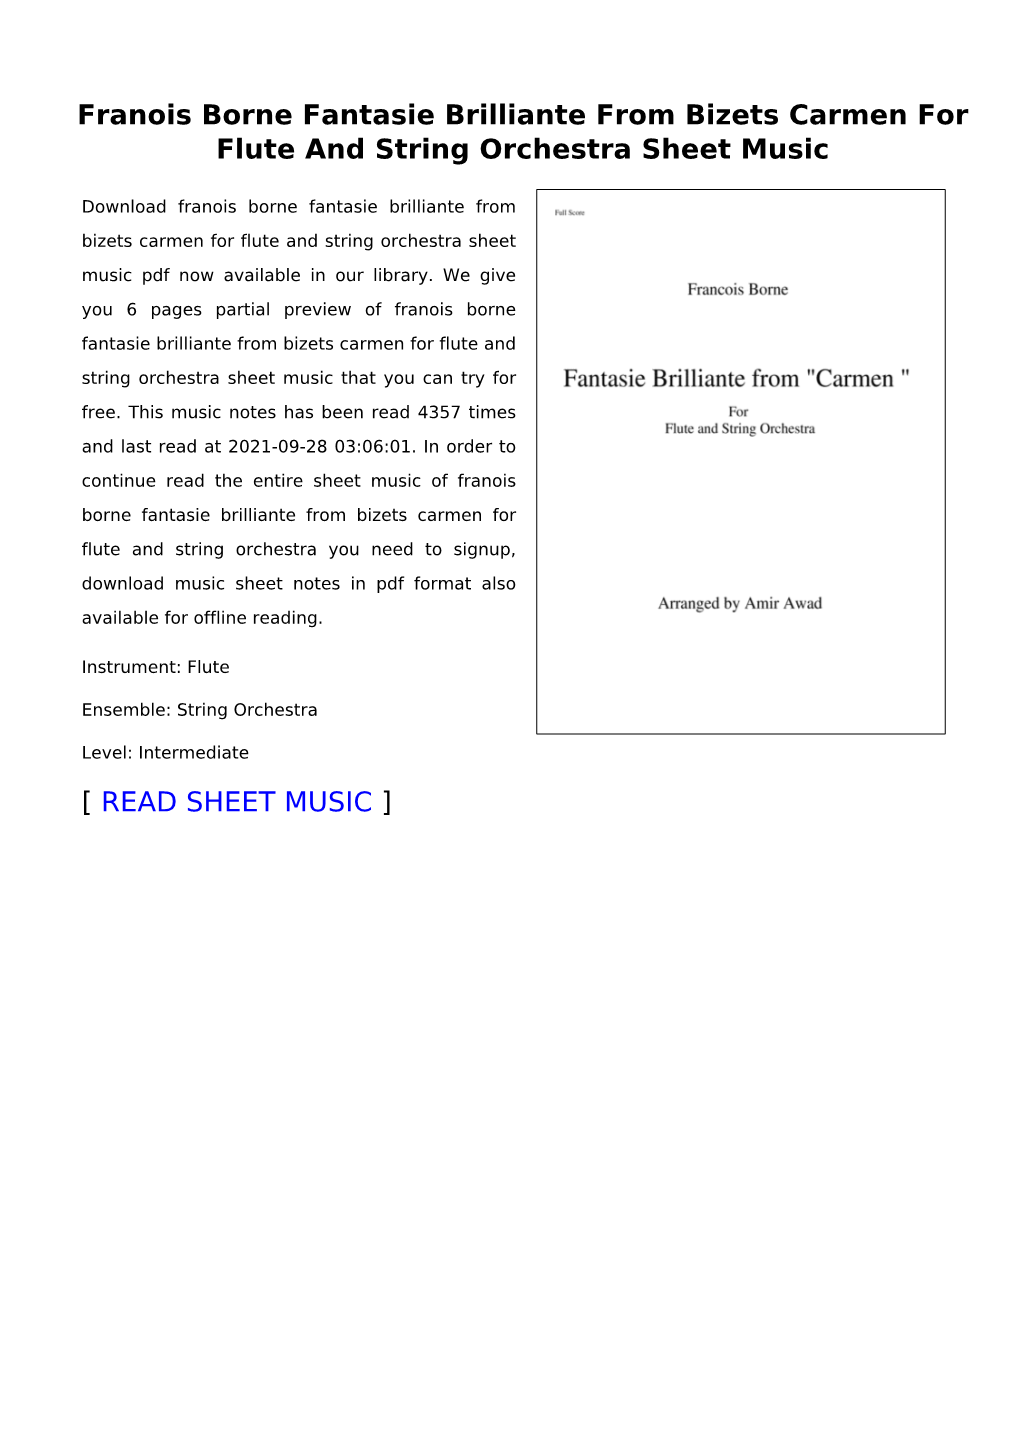 Franois Borne Fantasie Brilliante from Bizets Carmen for Flute and String Orchestra Sheet Music